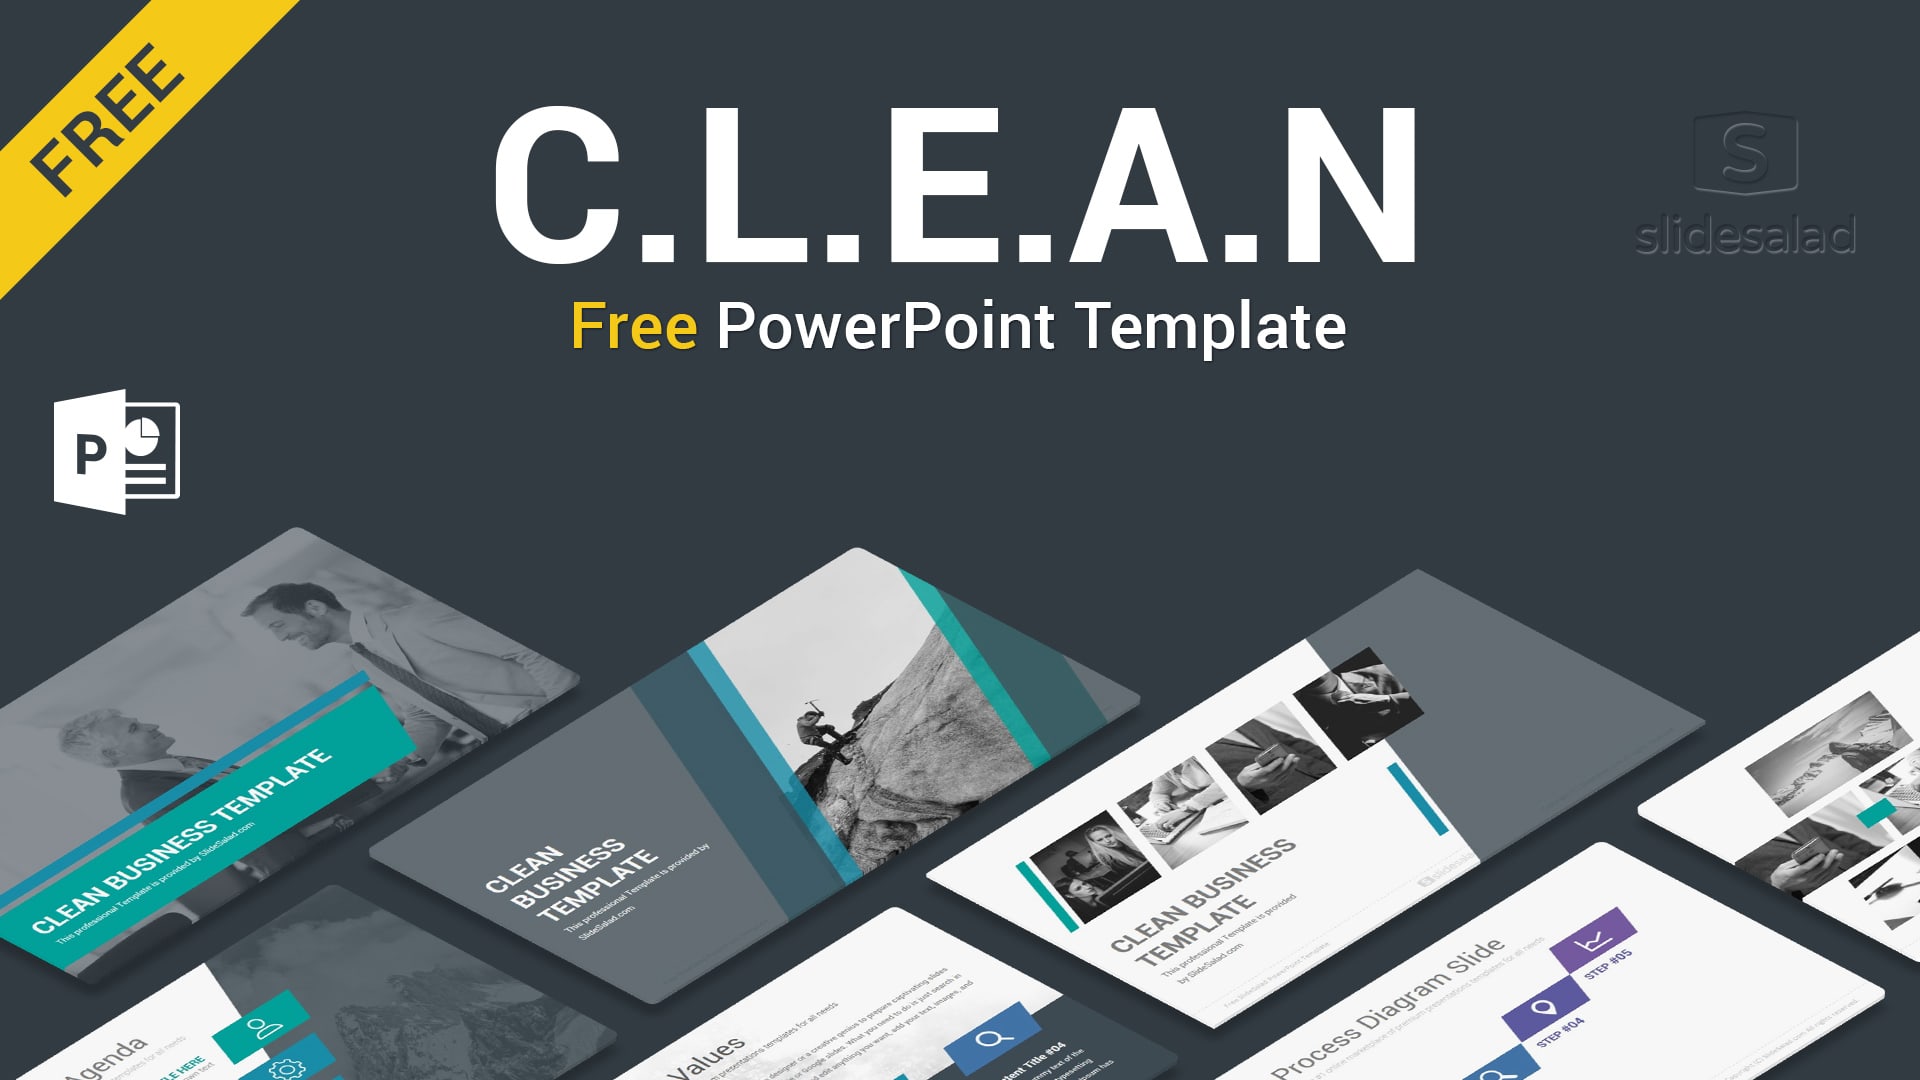 Clean Free PowerPoint Template - Free Download Inside Free Powerpoint Presentation Templates Downloads